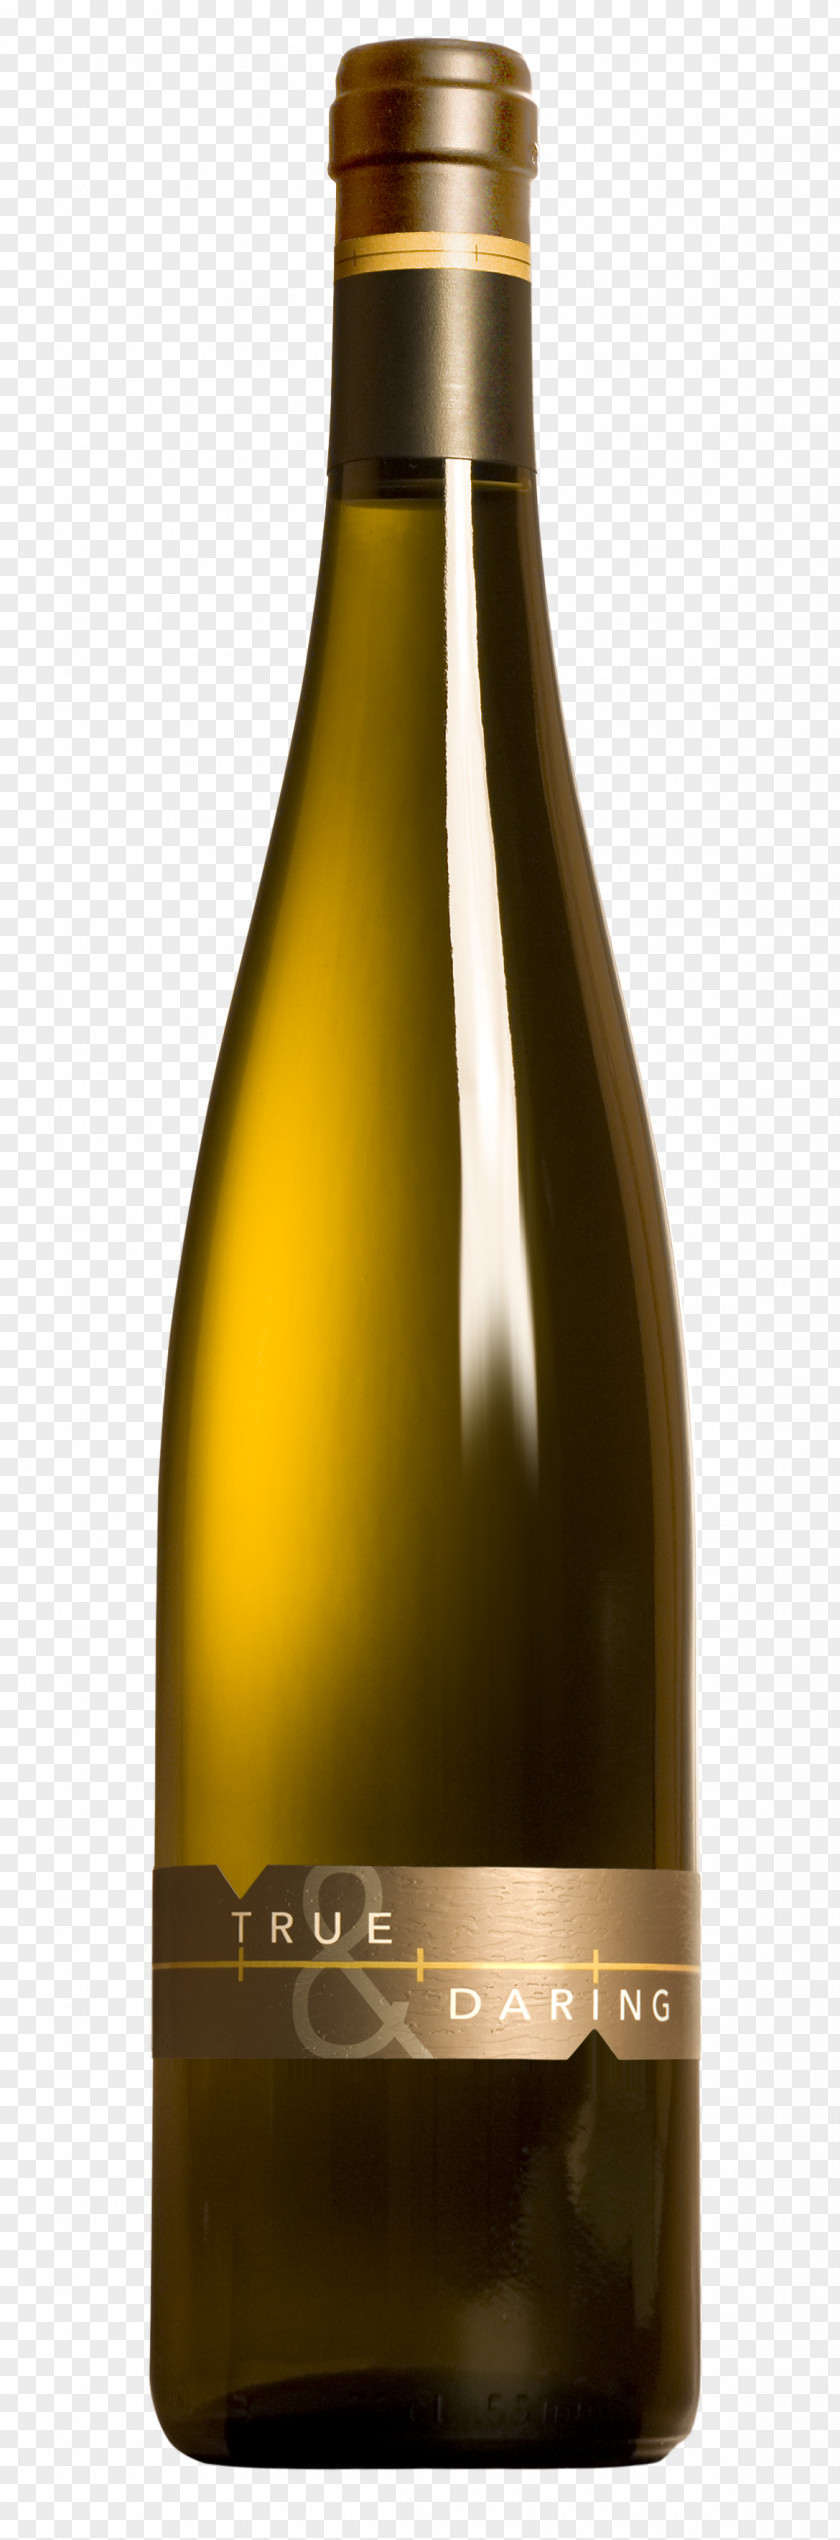 Wine Bottle Image White Champagne Glass PNG